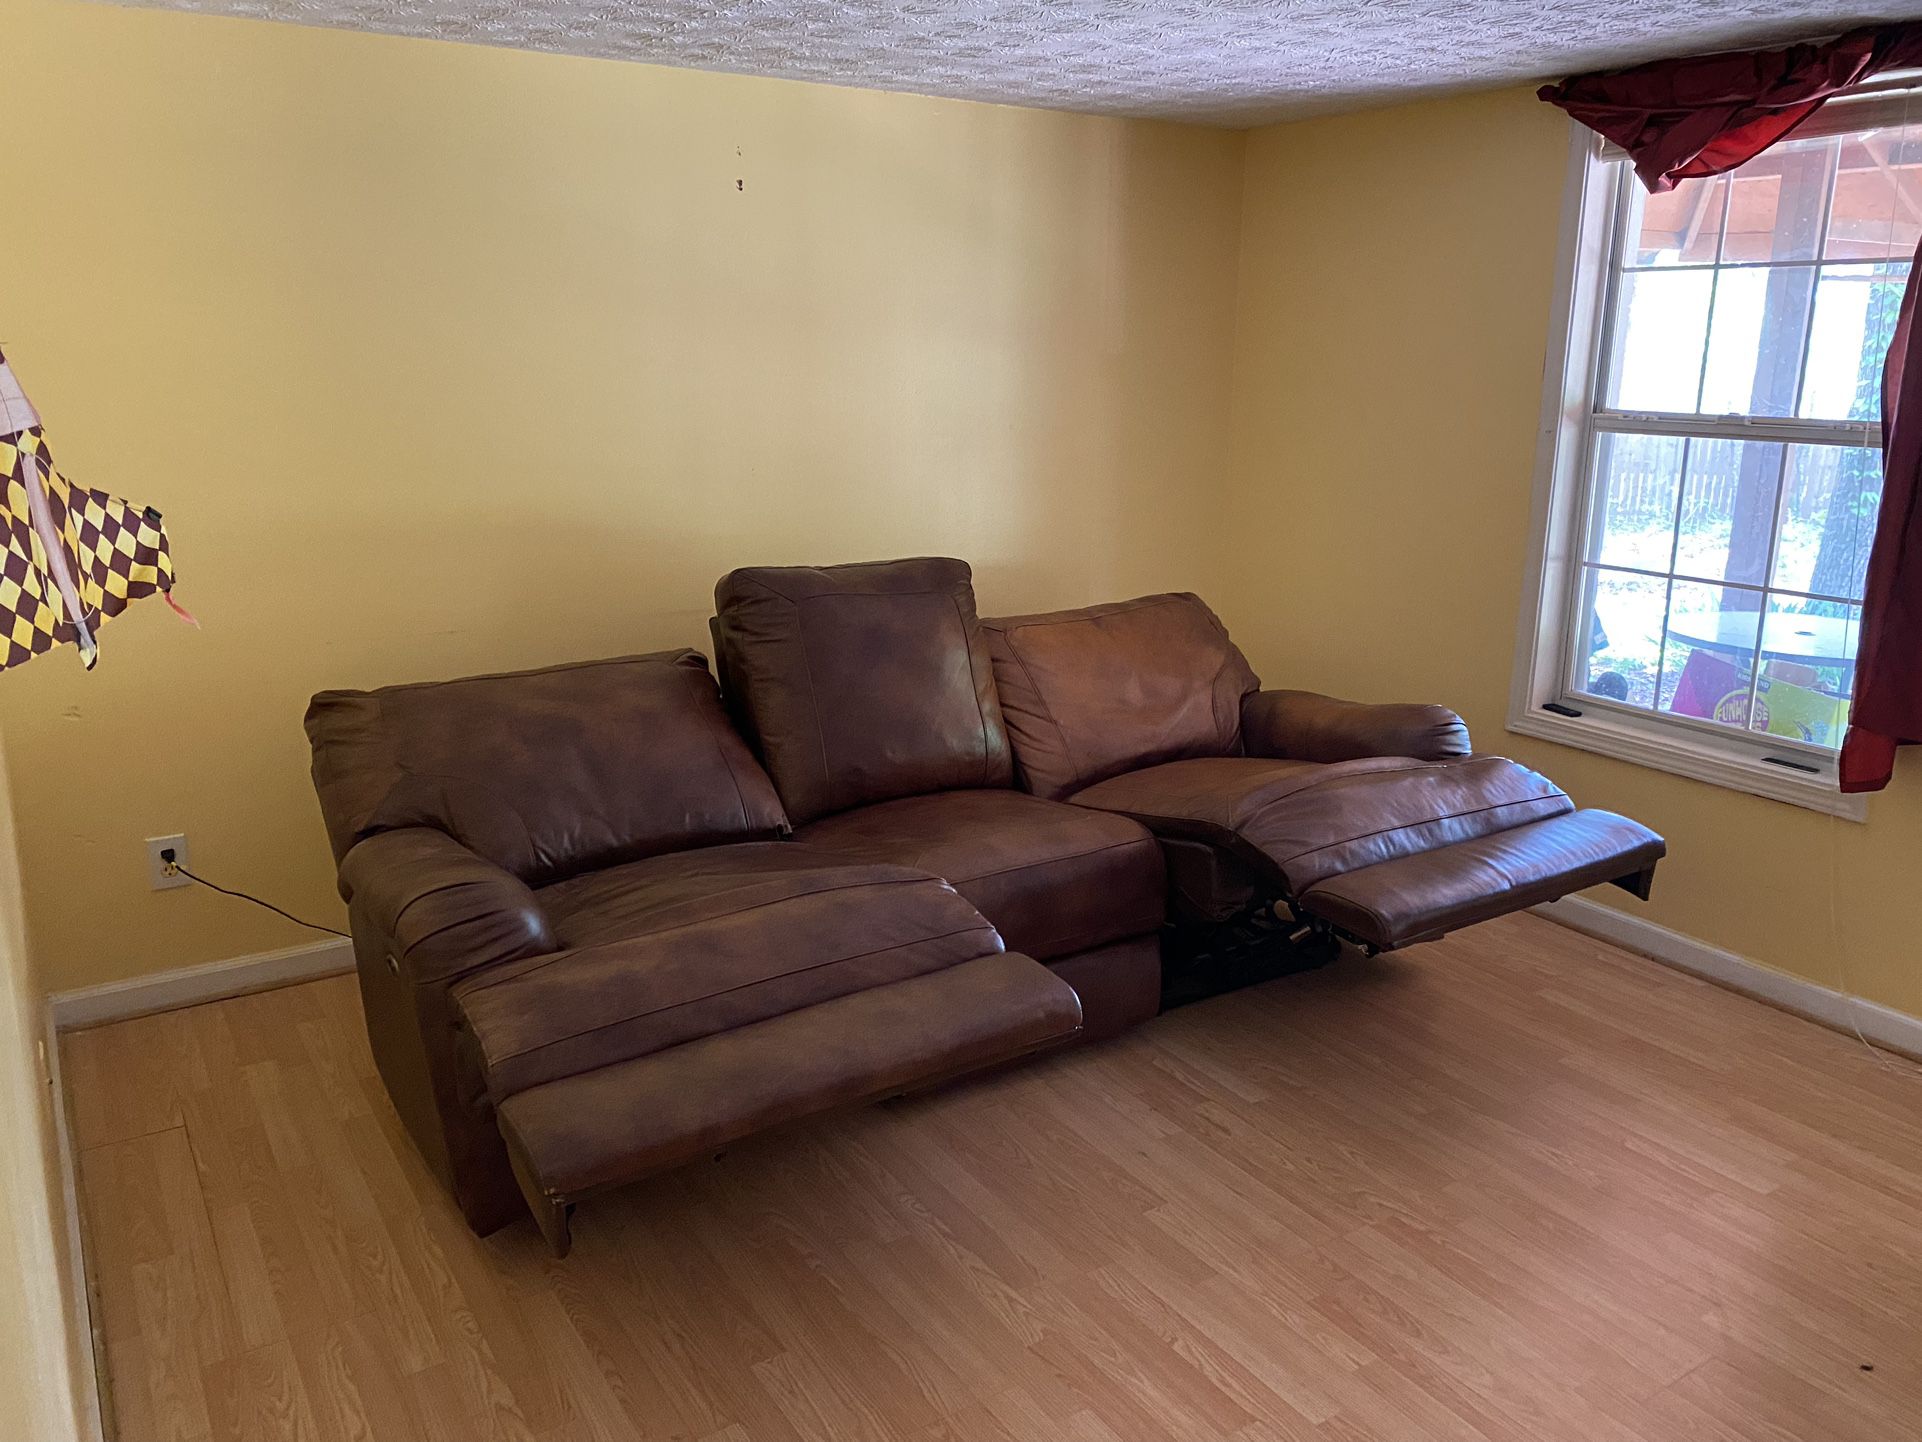  Leather Dual Power   Reclining Sofa  With One Recliner.  